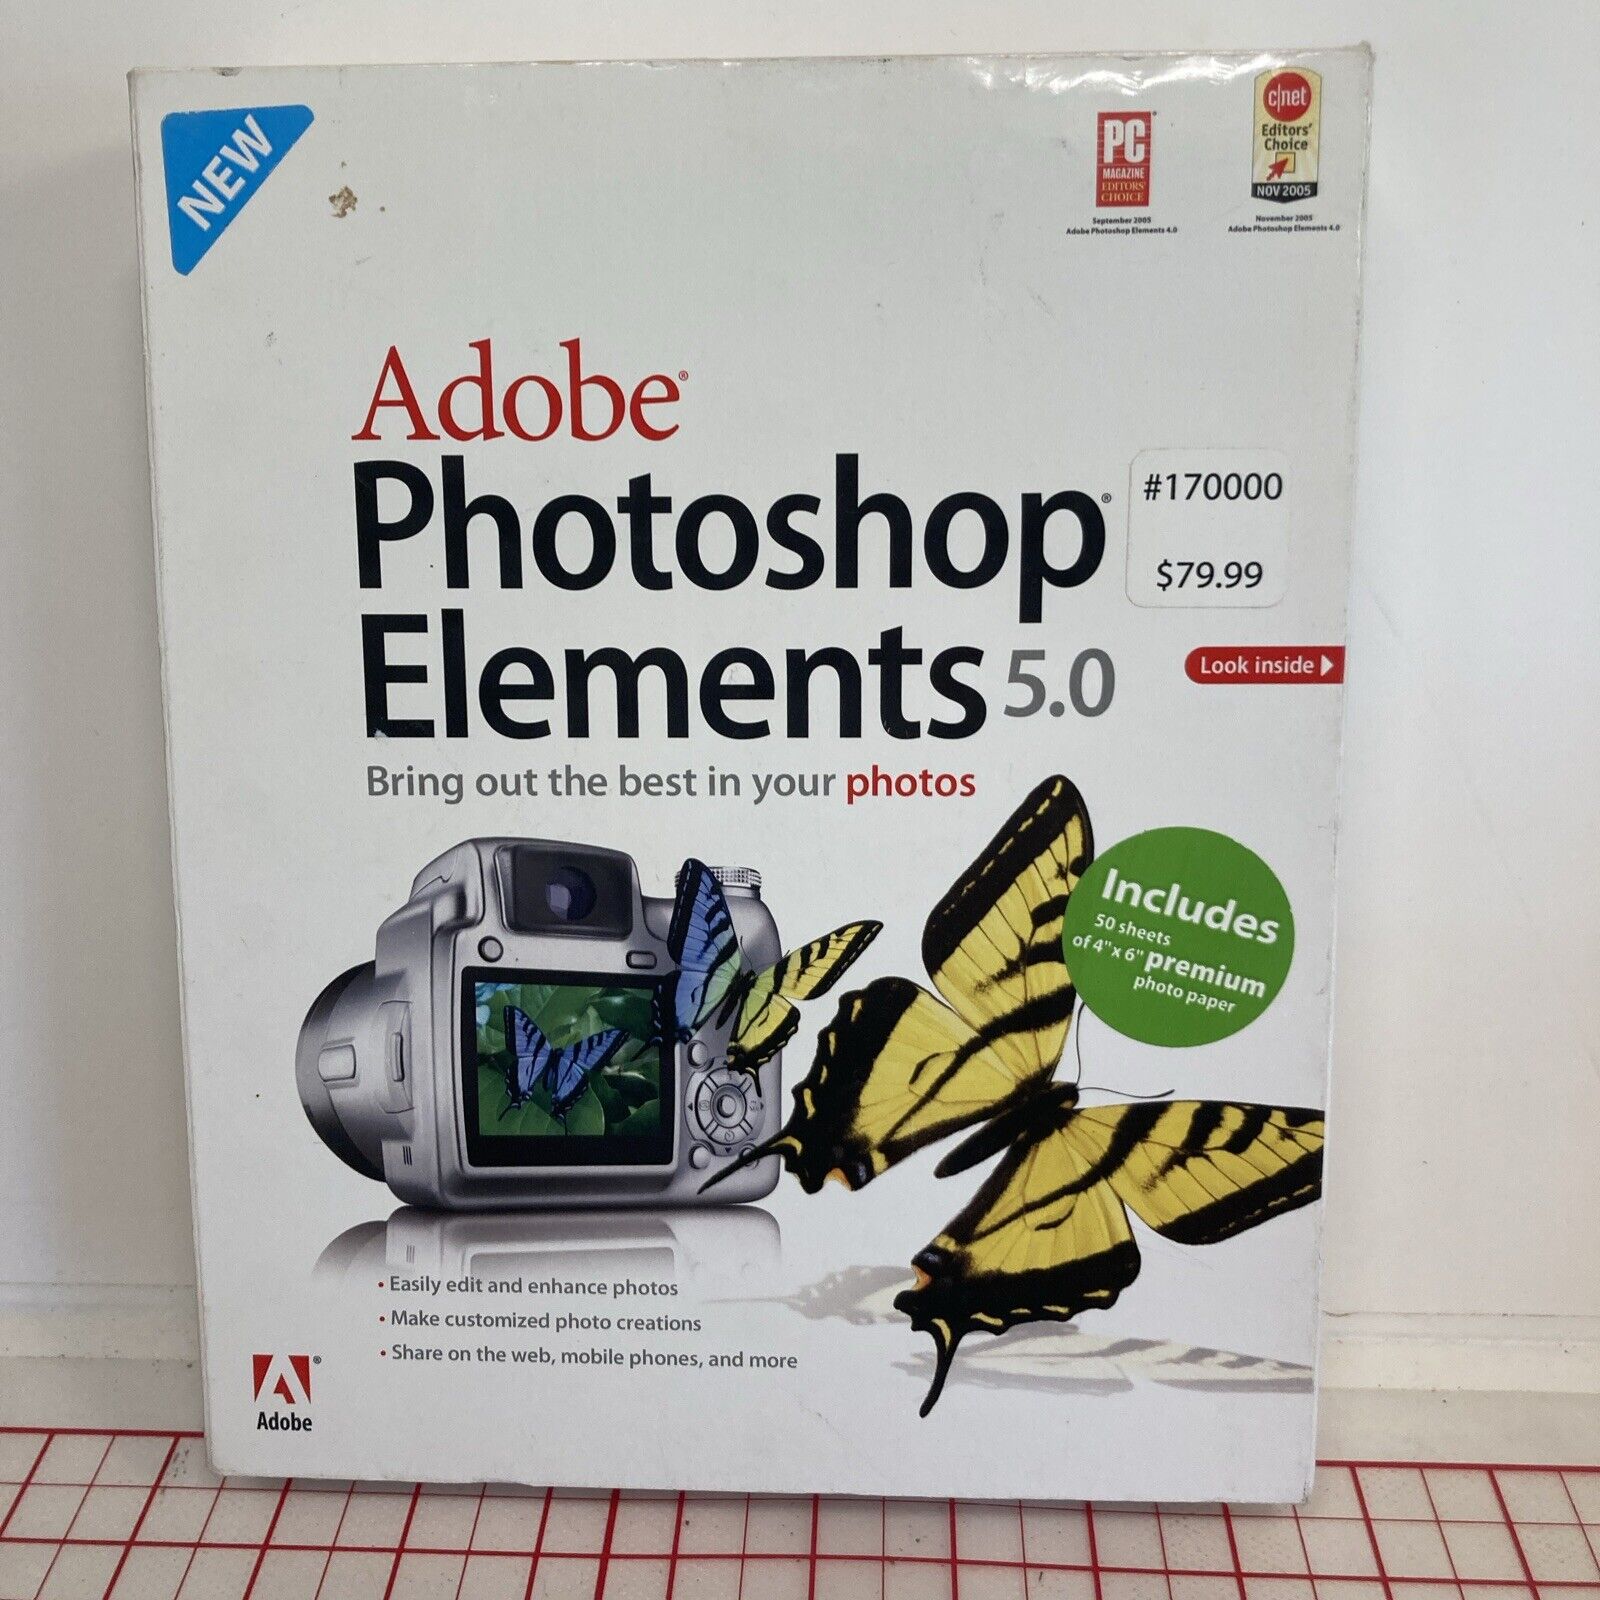 Adobe Photoshop Elements 5.0 for Windows XP w/ Serial Number Manual Boxed B25